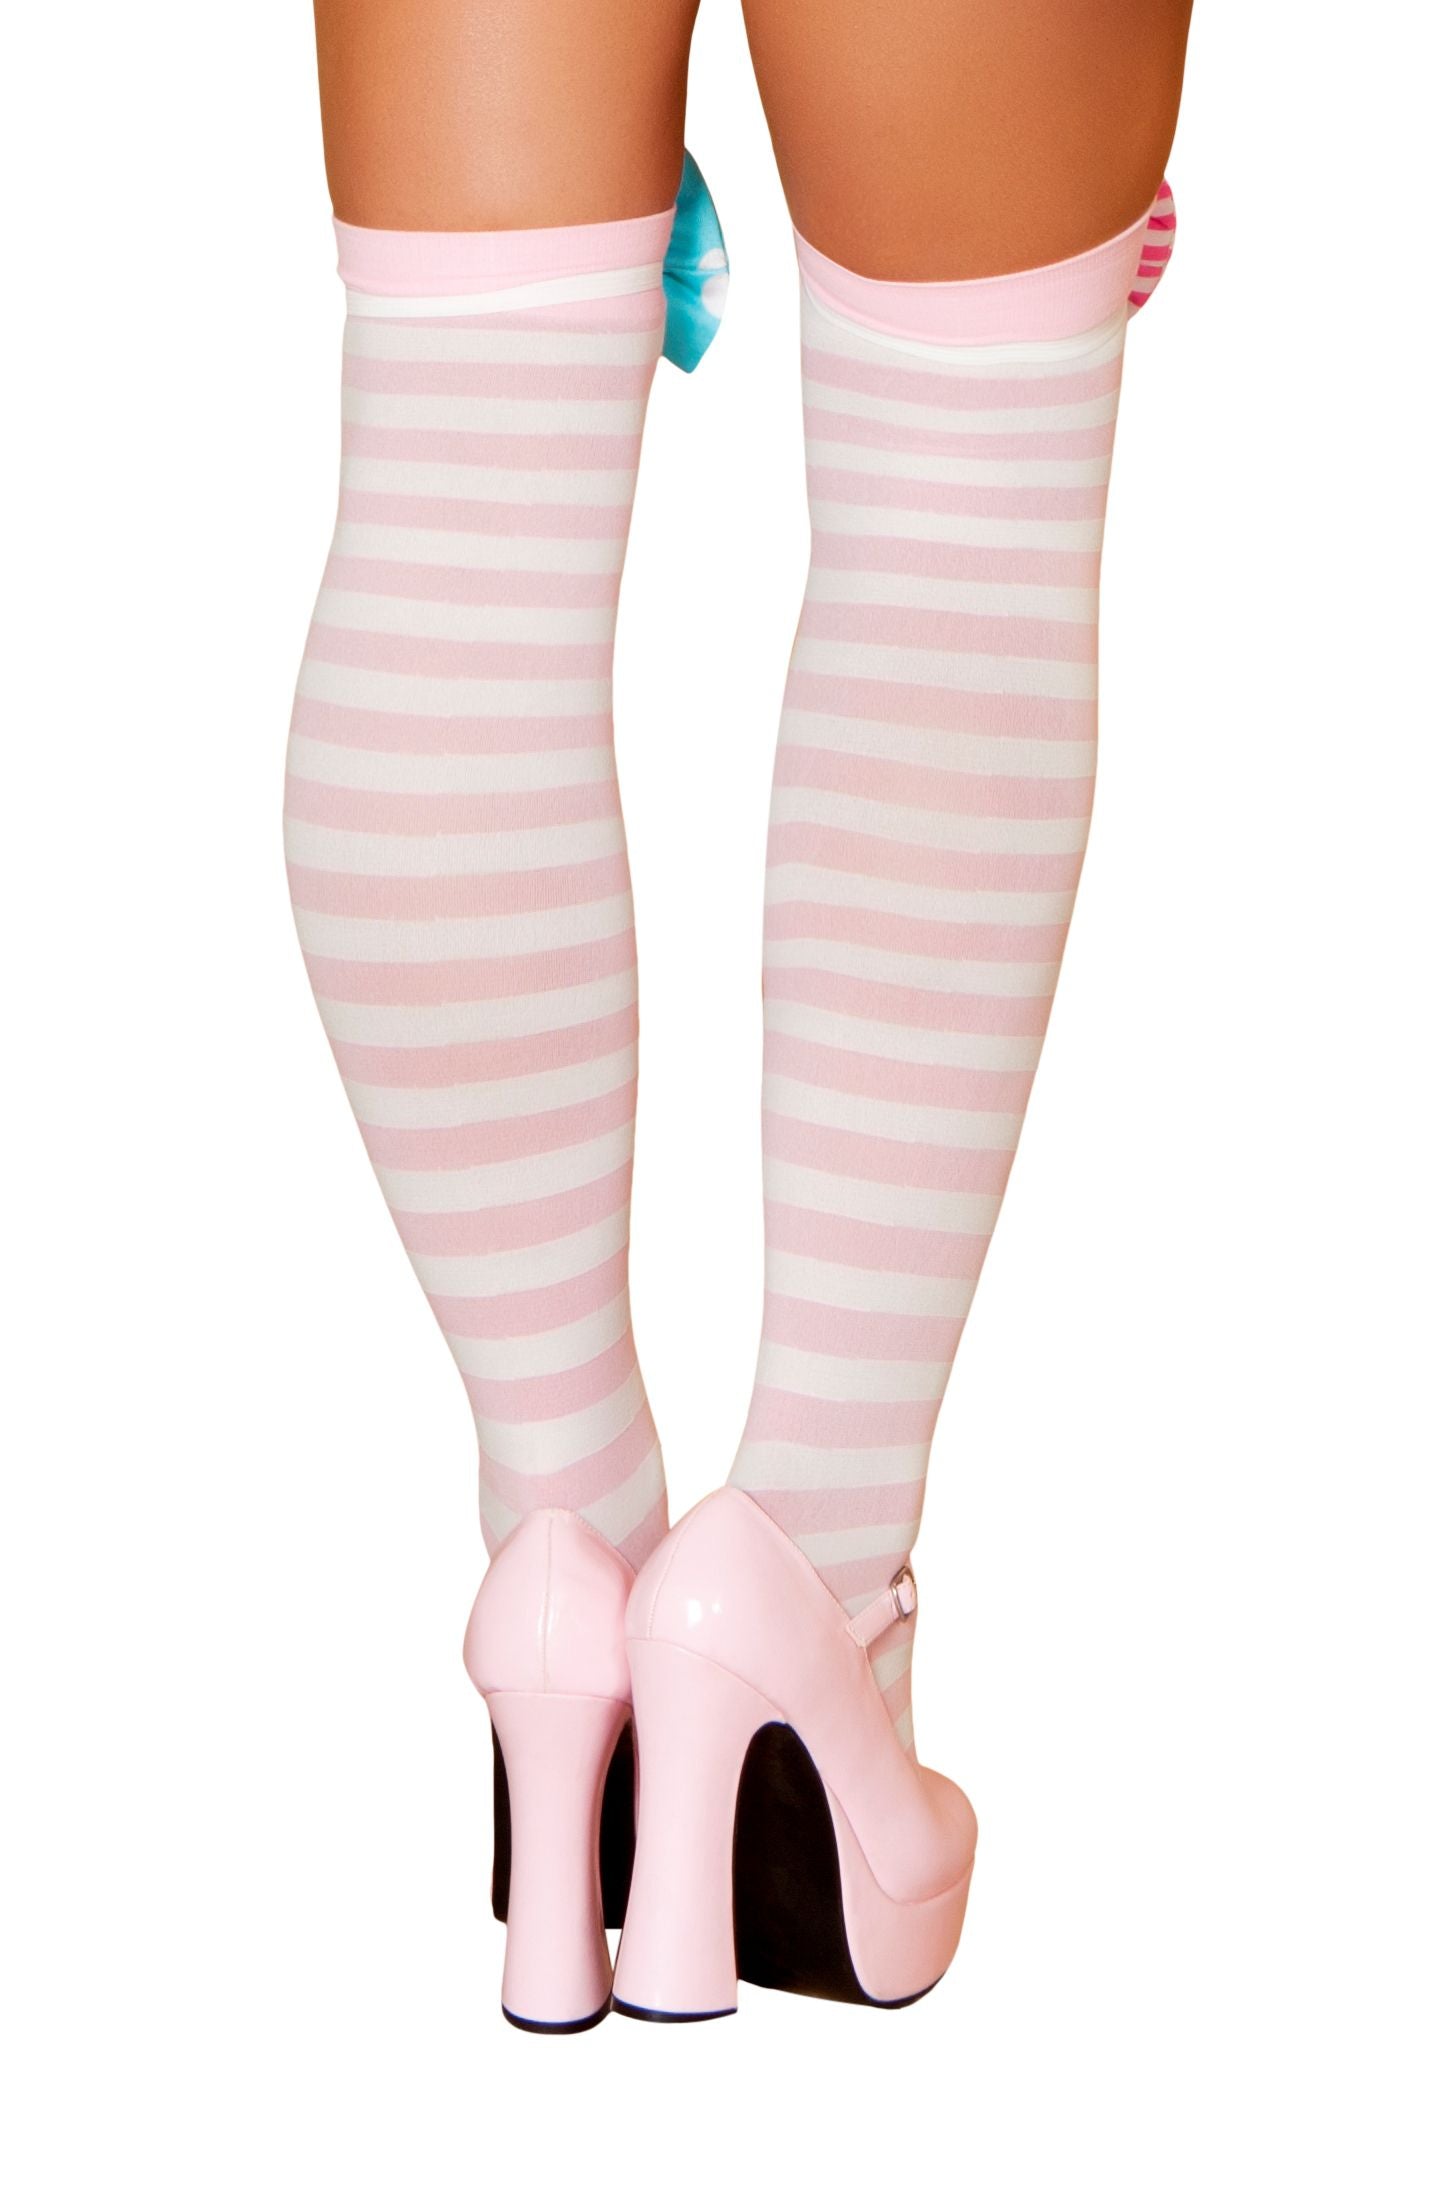 Roma Costume Knee High Striped Stockings with Bows Pink/White One Size